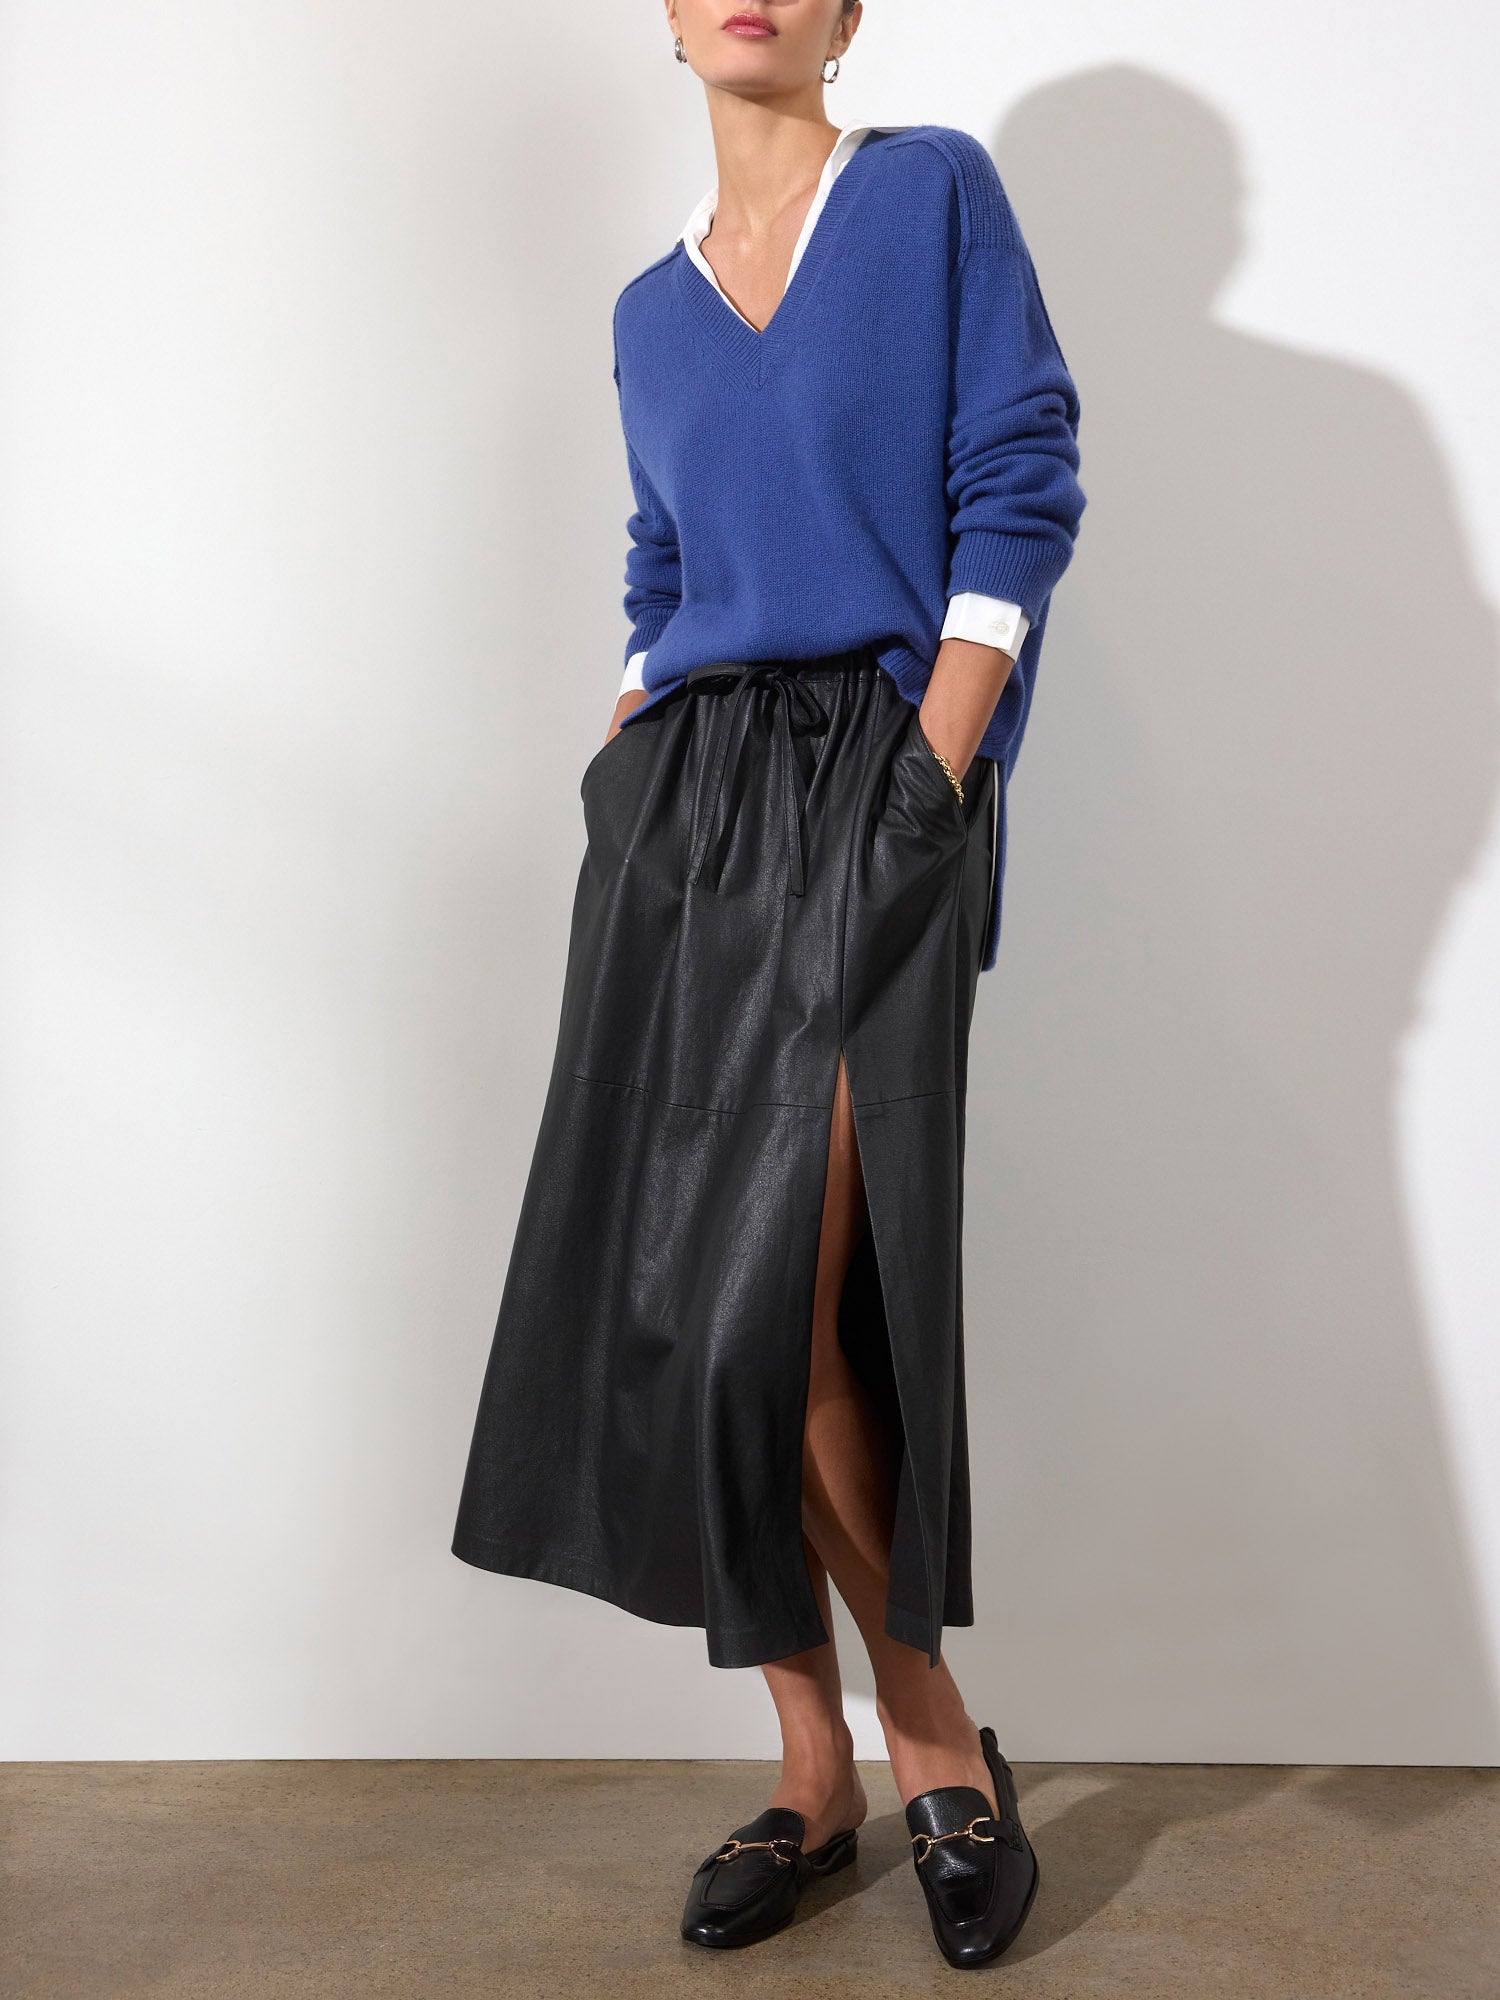 Looker blue layered v-neck sweater full view